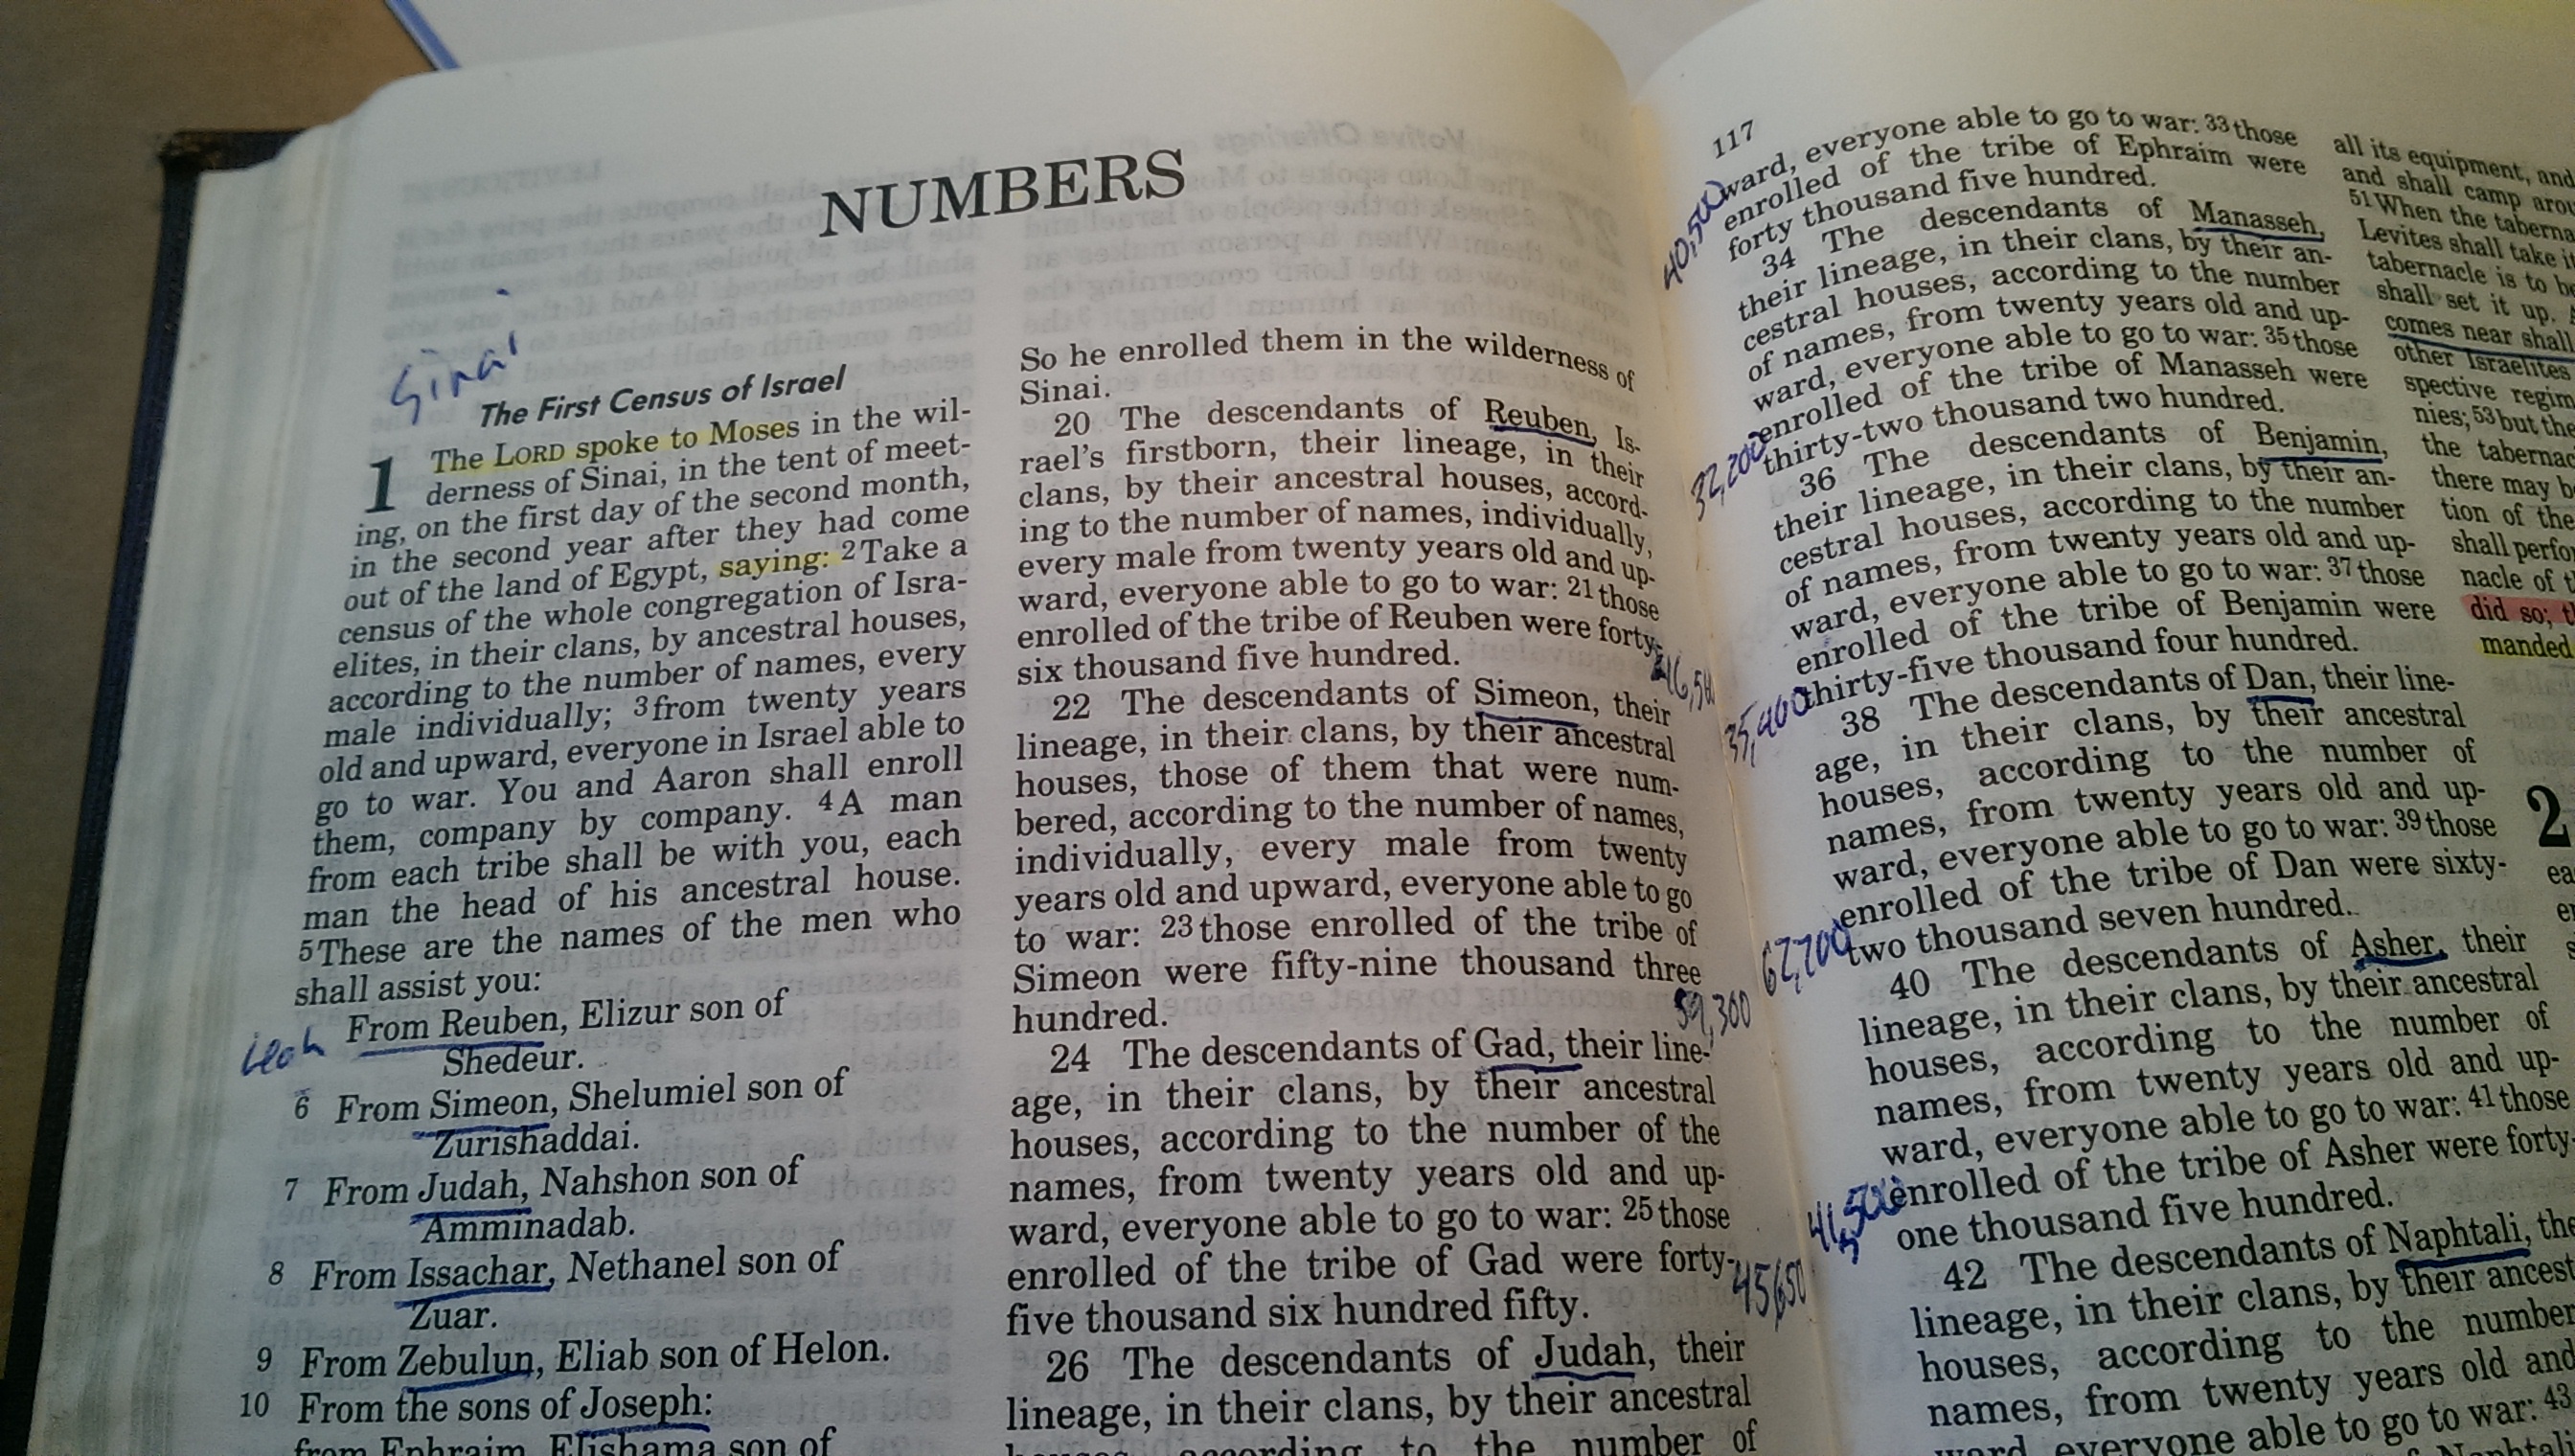 The book of Numbers